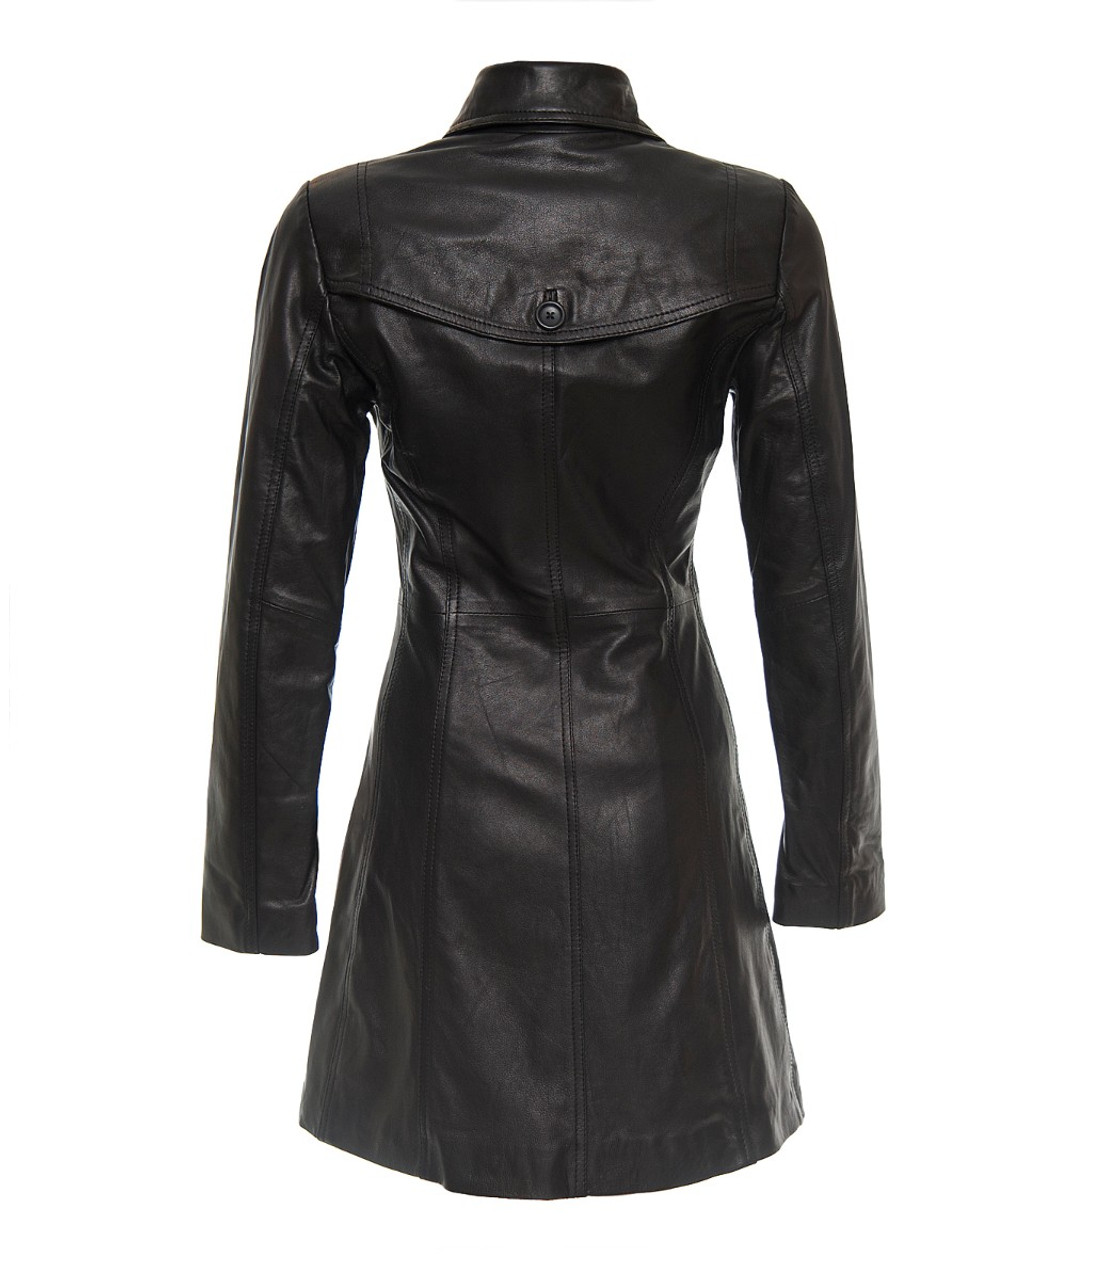 Women's Fashion Leather Coat Black Color | Feather Skin